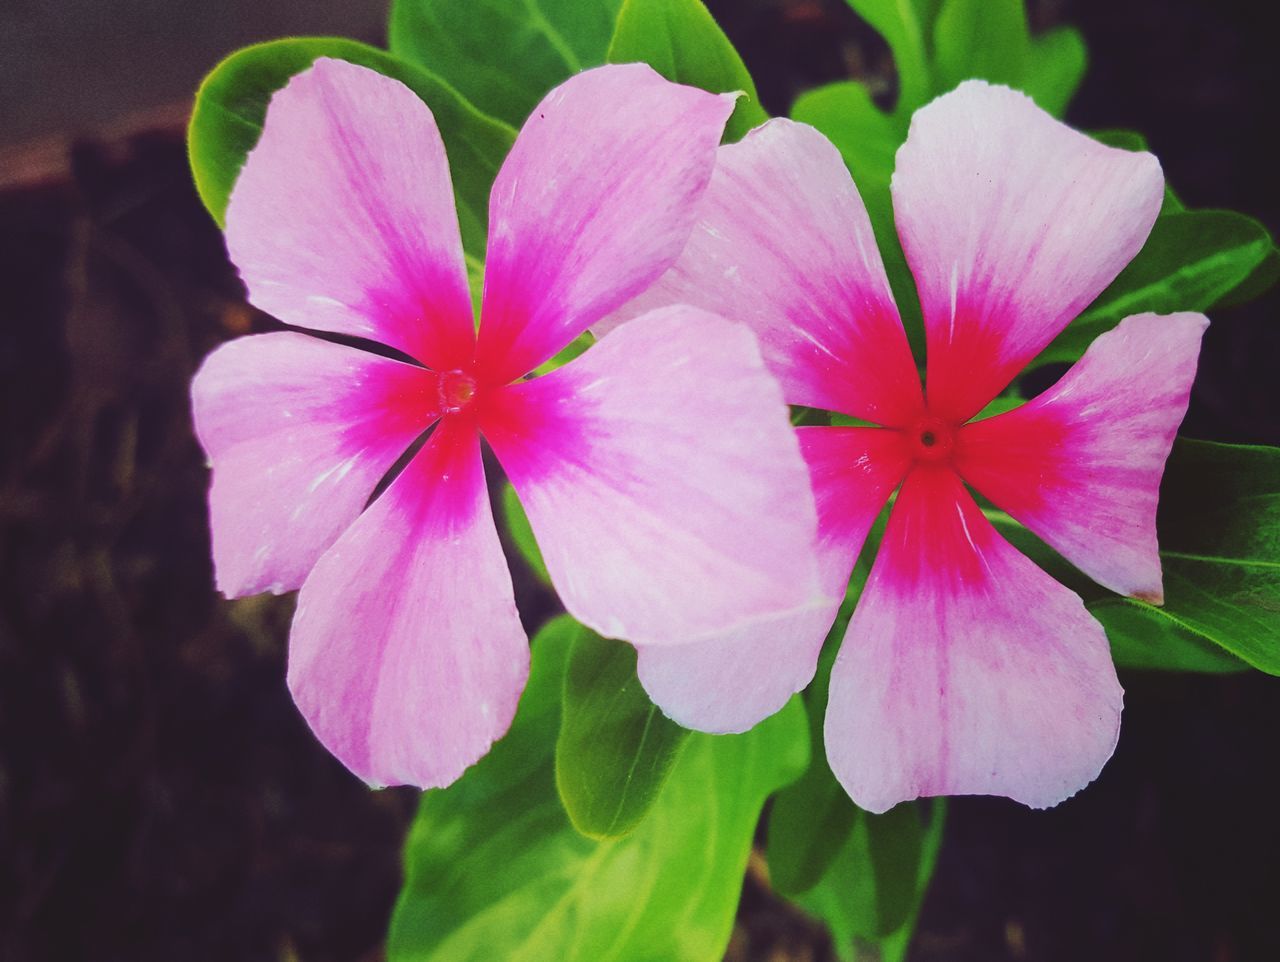 flower, petal, beauty in nature, freshness, nature, fragility, flower head, growth, plant, pink color, blooming, outdoors, no people, close-up, day, periwinkle, petunia